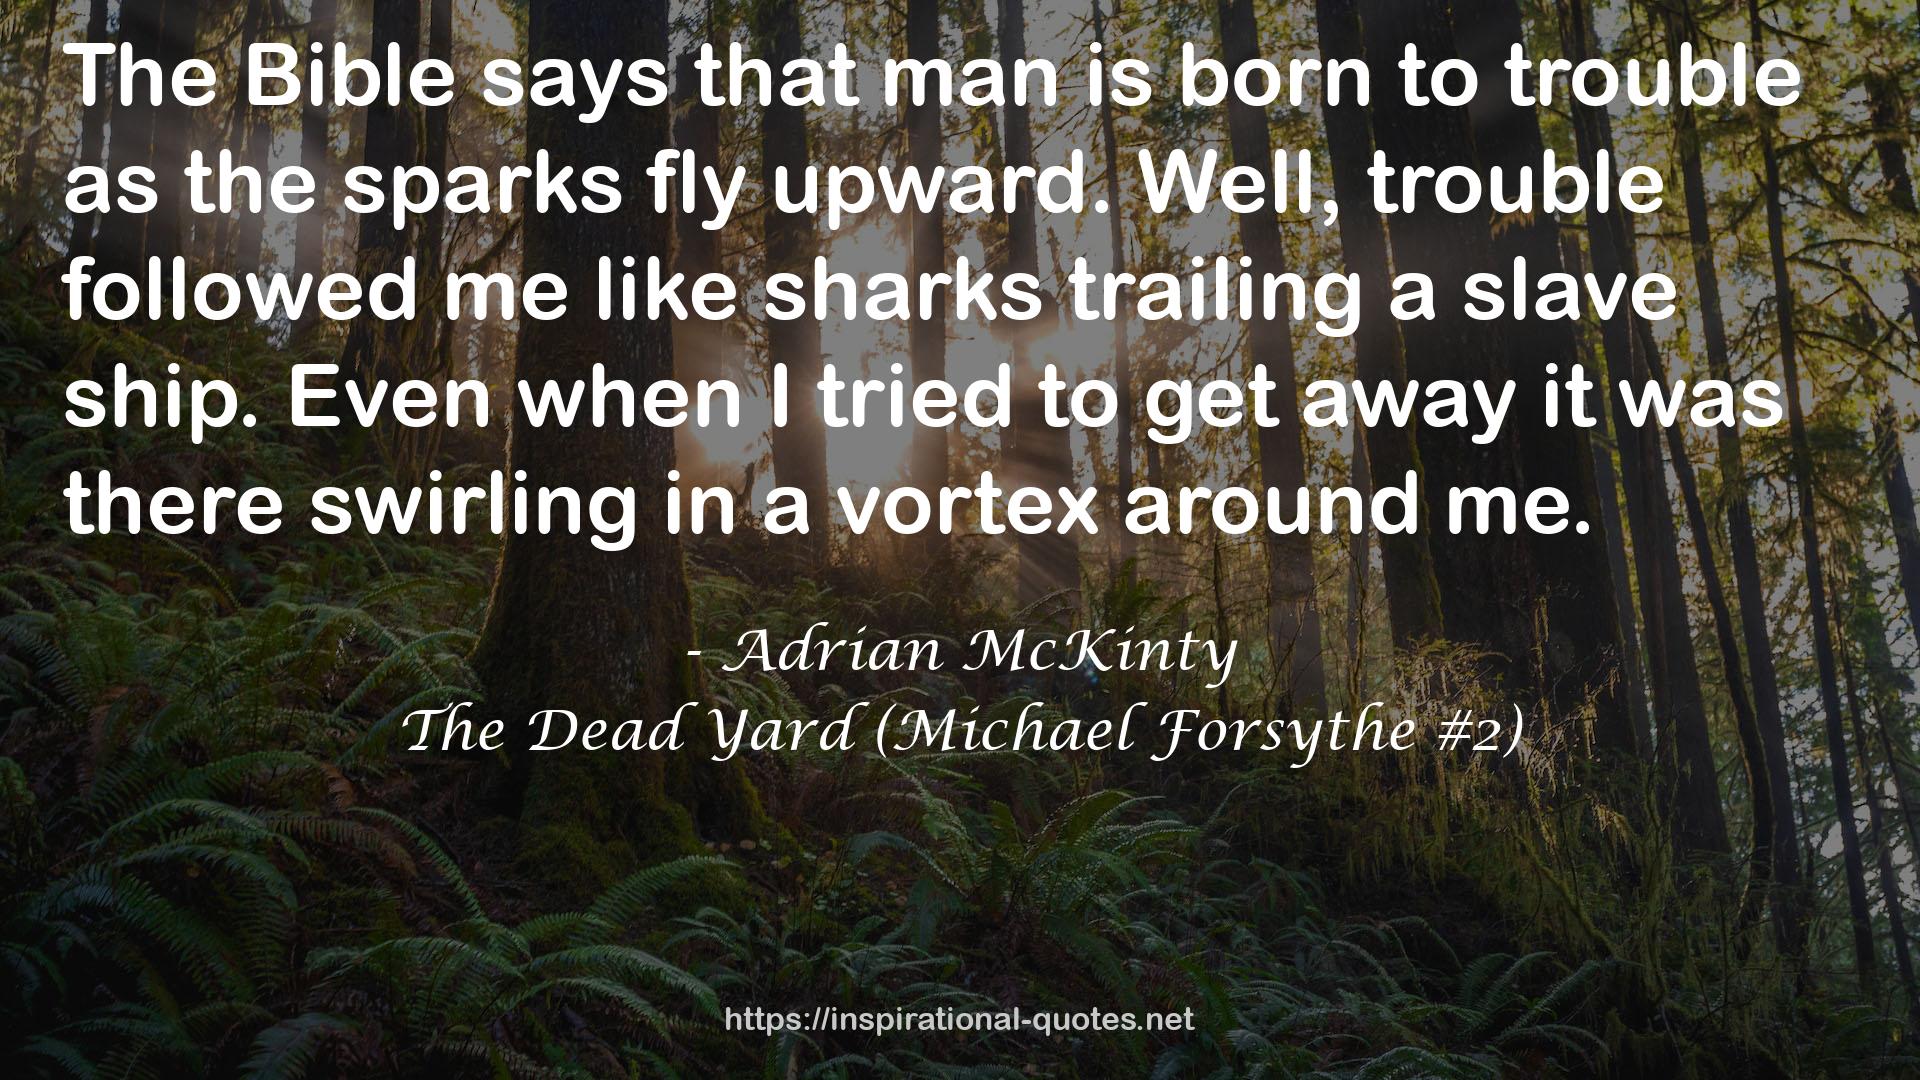 The Dead Yard (Michael Forsythe #2) QUOTES